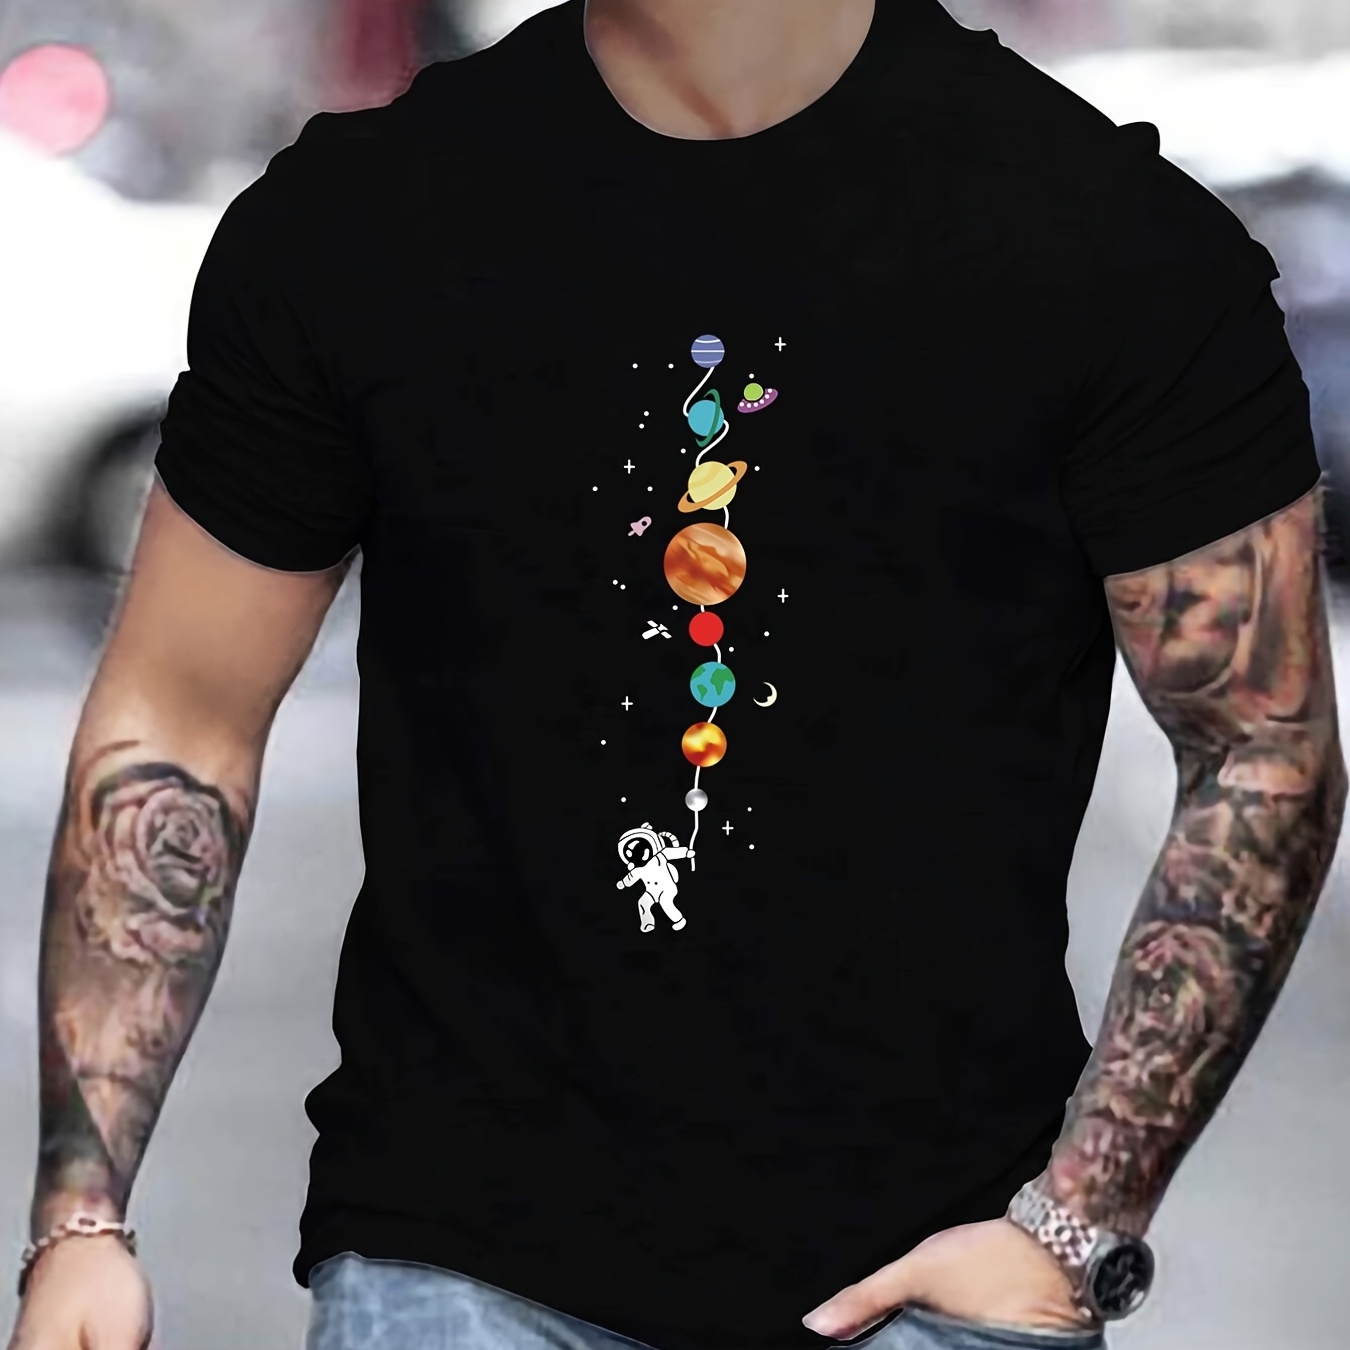 

Men's Casual Sports Loose T-shirts Solar System Planet Astronaut Graphic Round Neck Short Sleeve Tees Top Summer Clothes